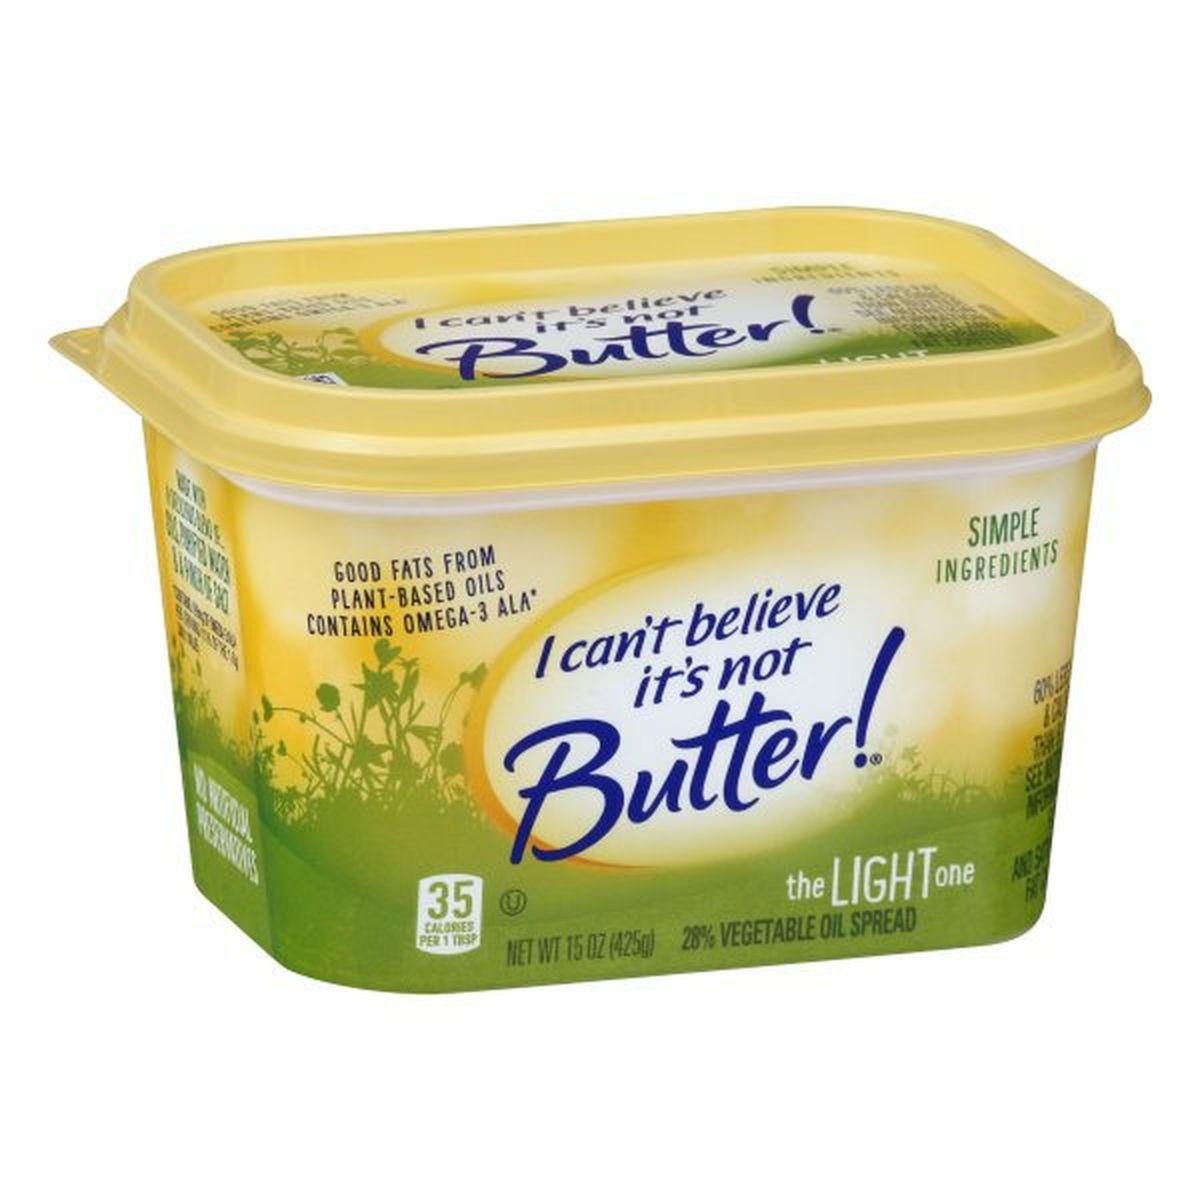 Calories in I Can't Believe It's Not Butter Vegetable Oil Spread, 28%, The Light One